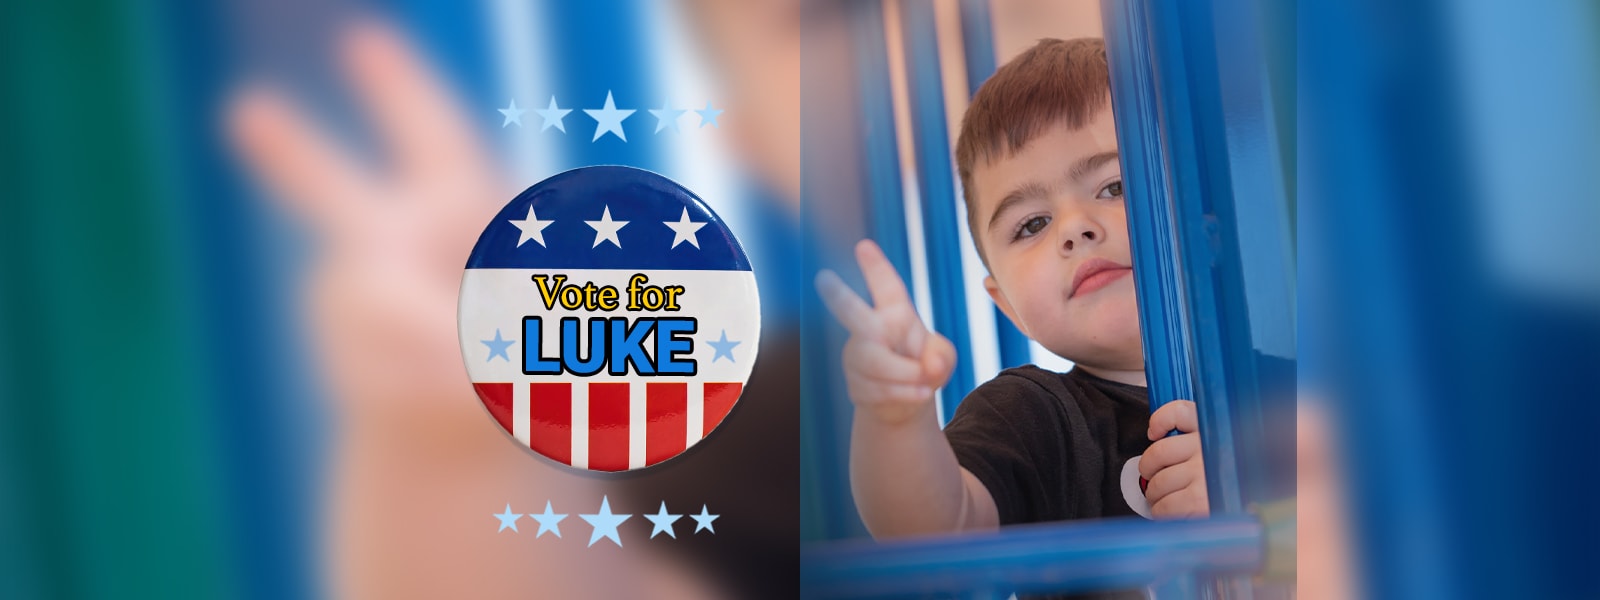 Vote for Luke button with a student.